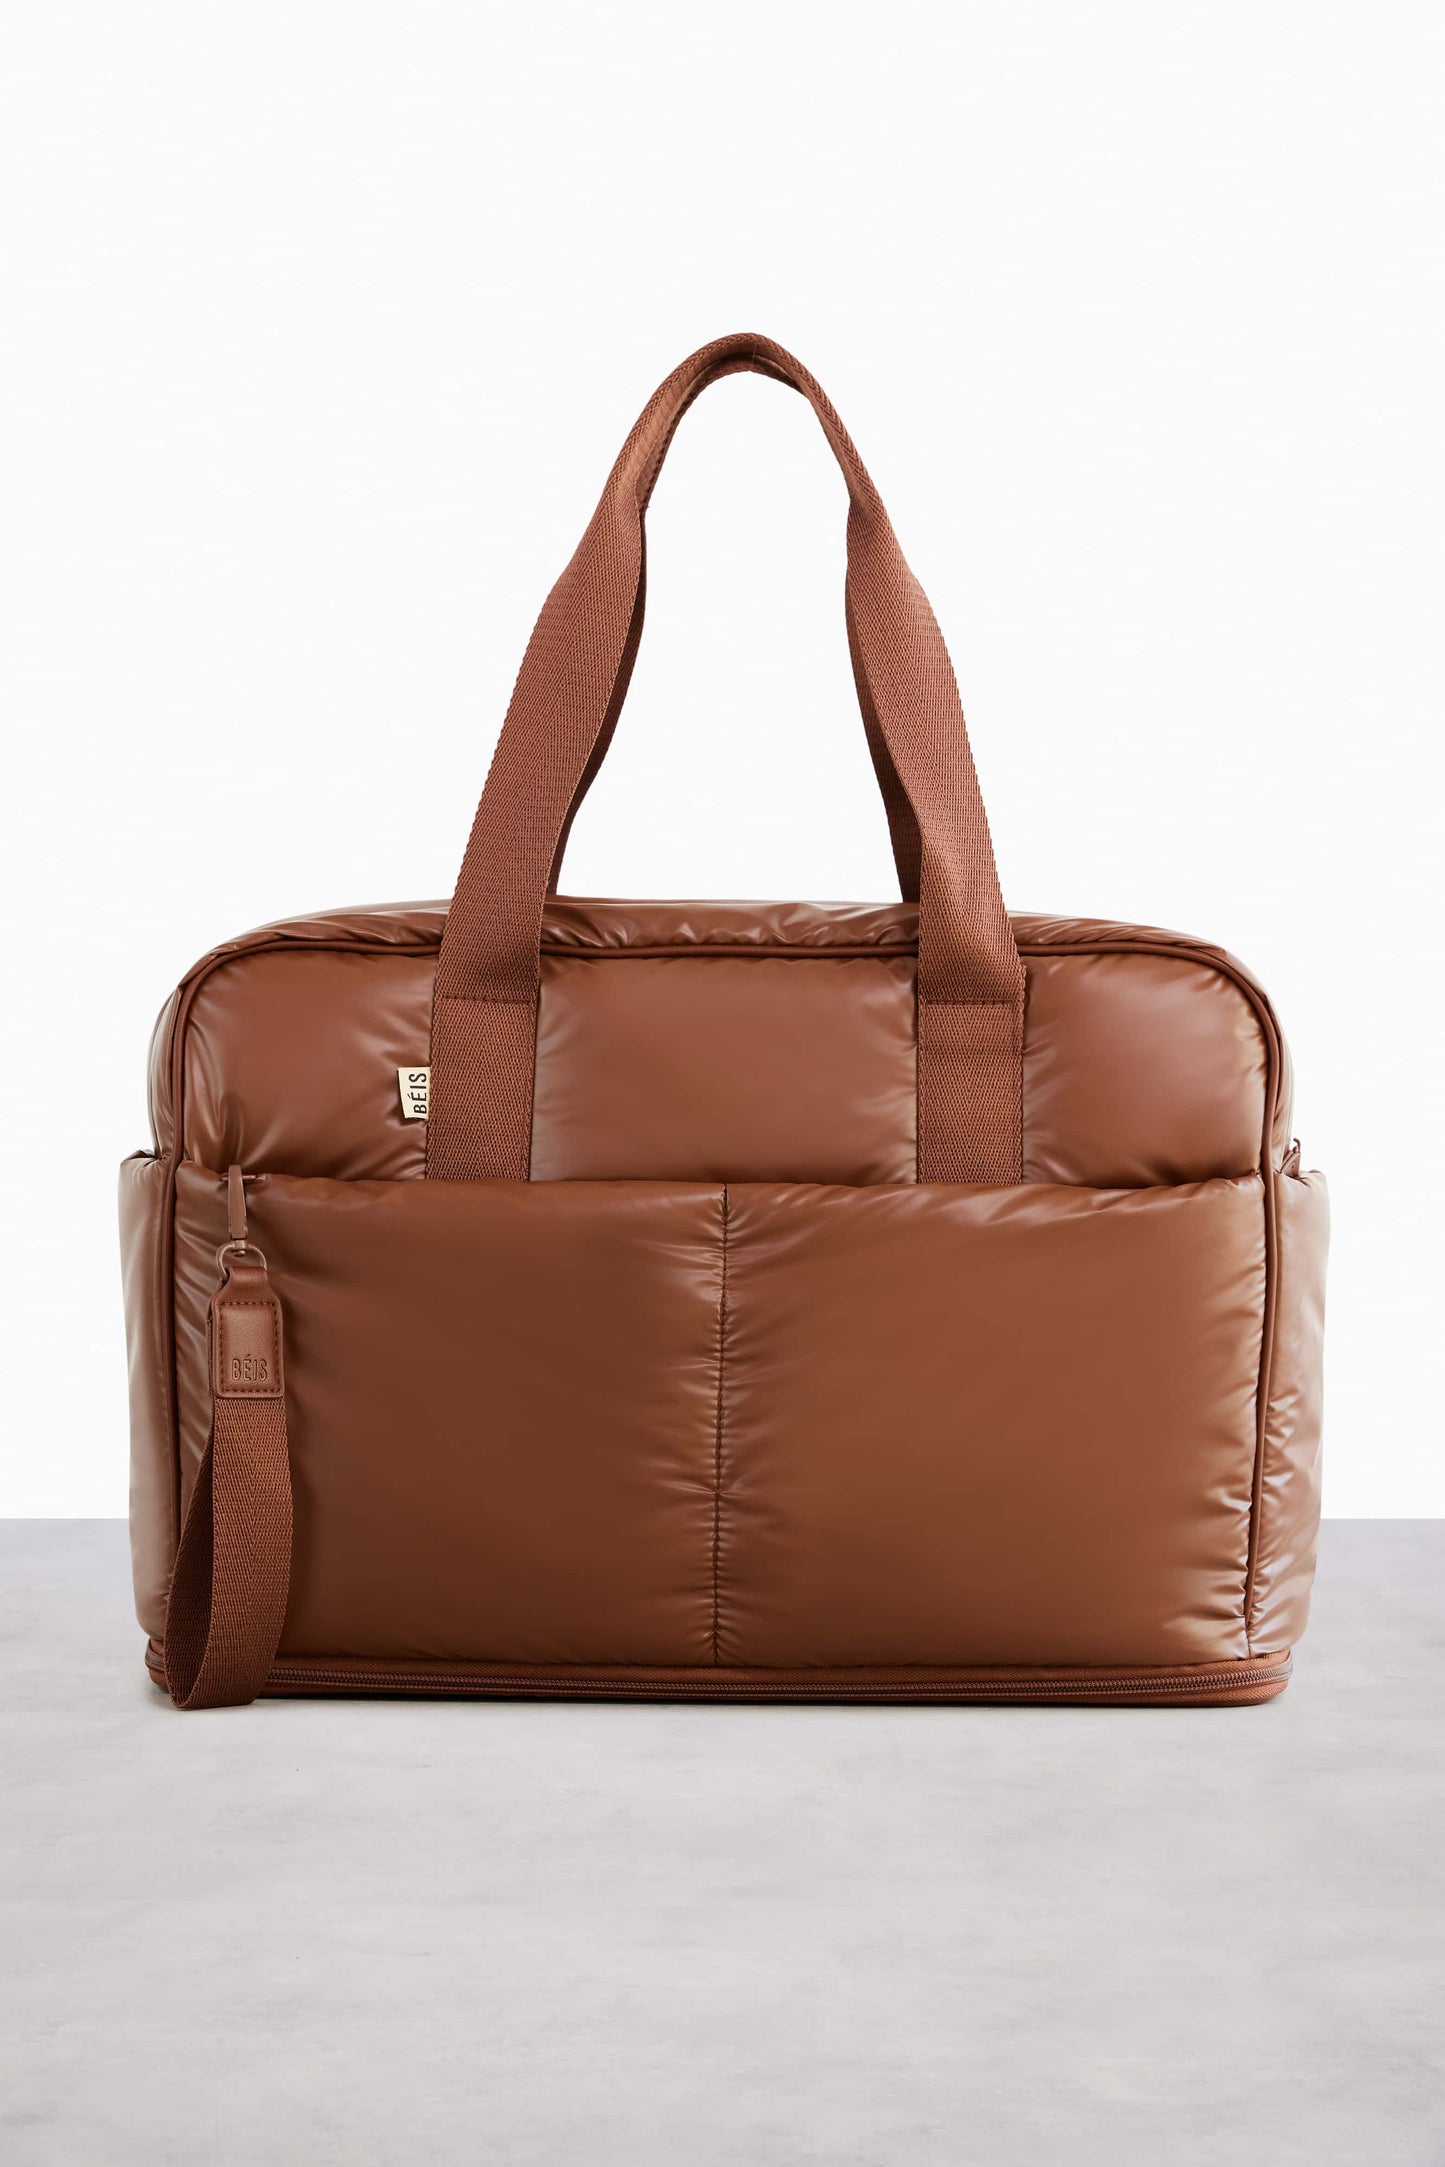 The Expandable Duffle in Maple